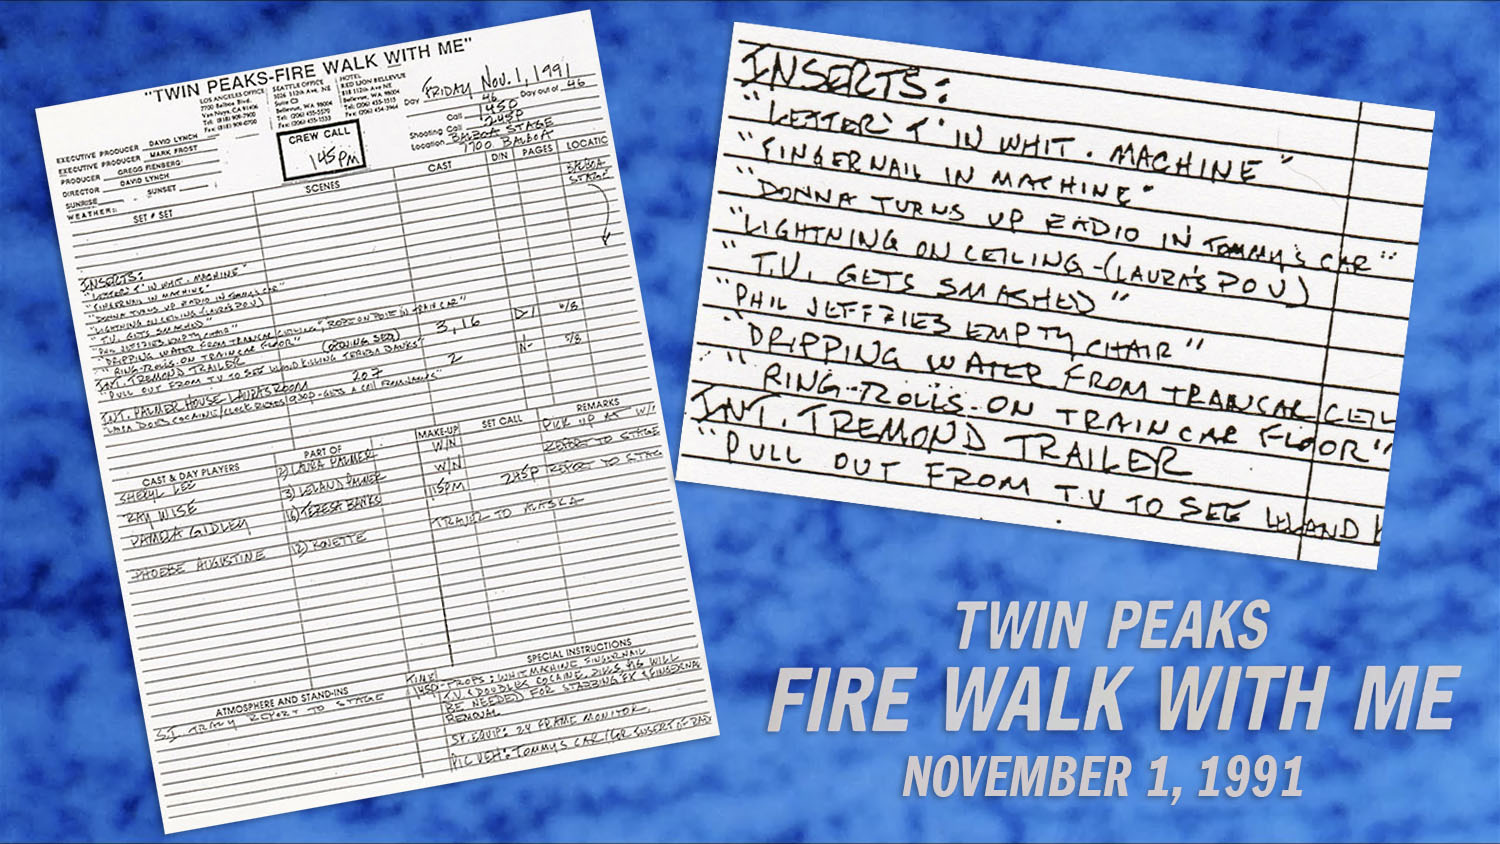 Two images of call sheets from Twin Peaks: Fire Walk With Me